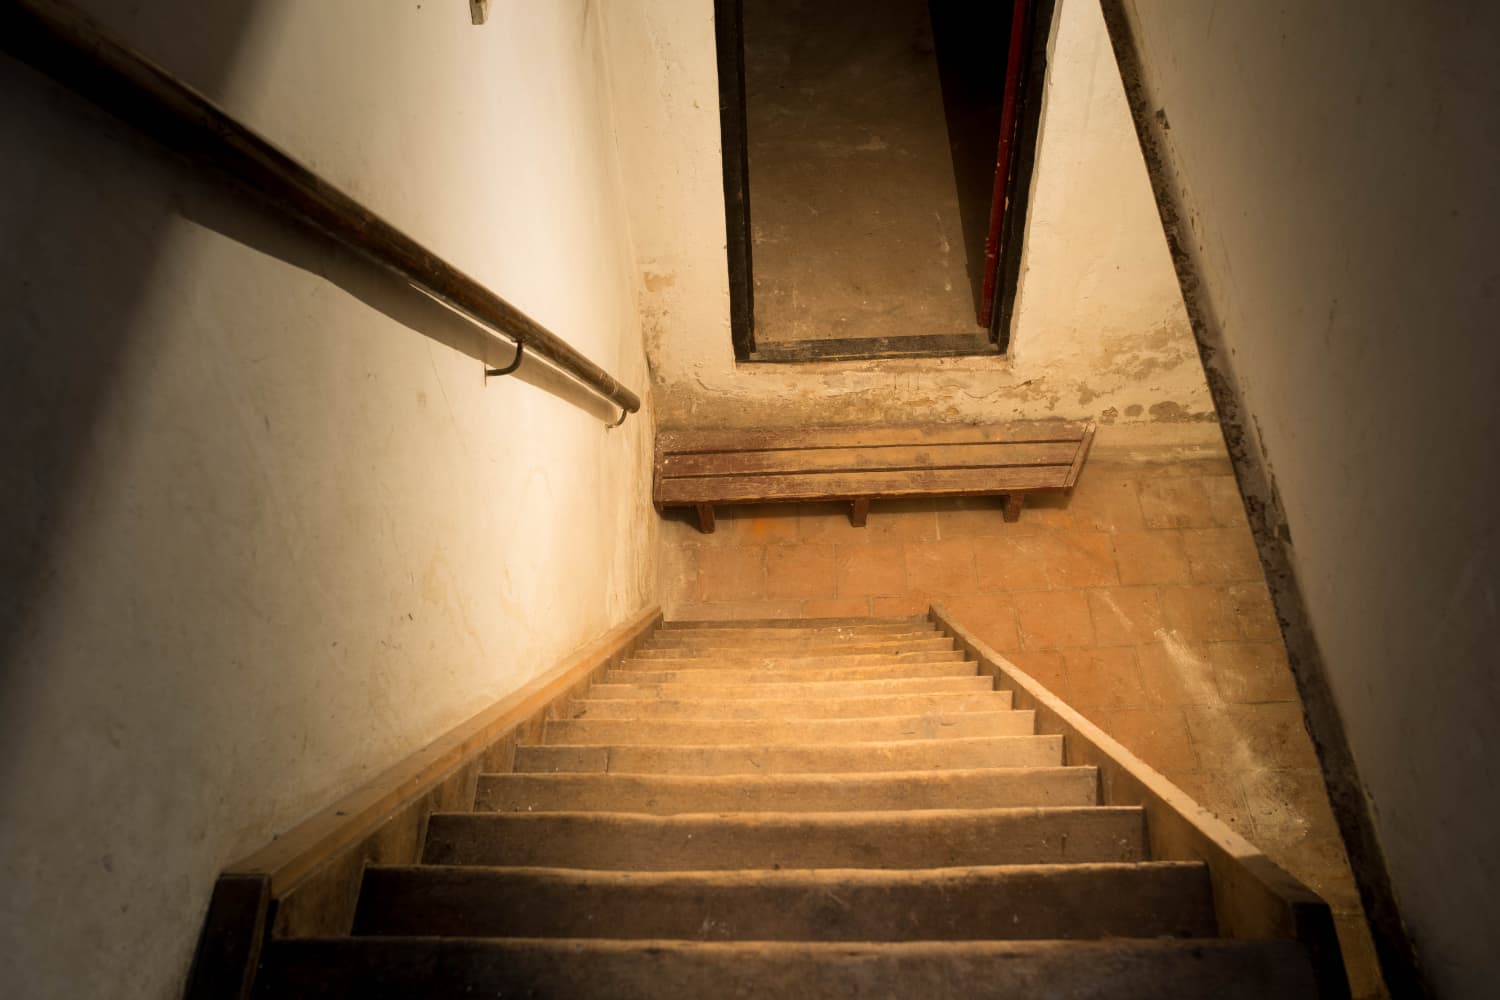 These Are the Scariest Basements From Iconic Horror Movies and TV Shows